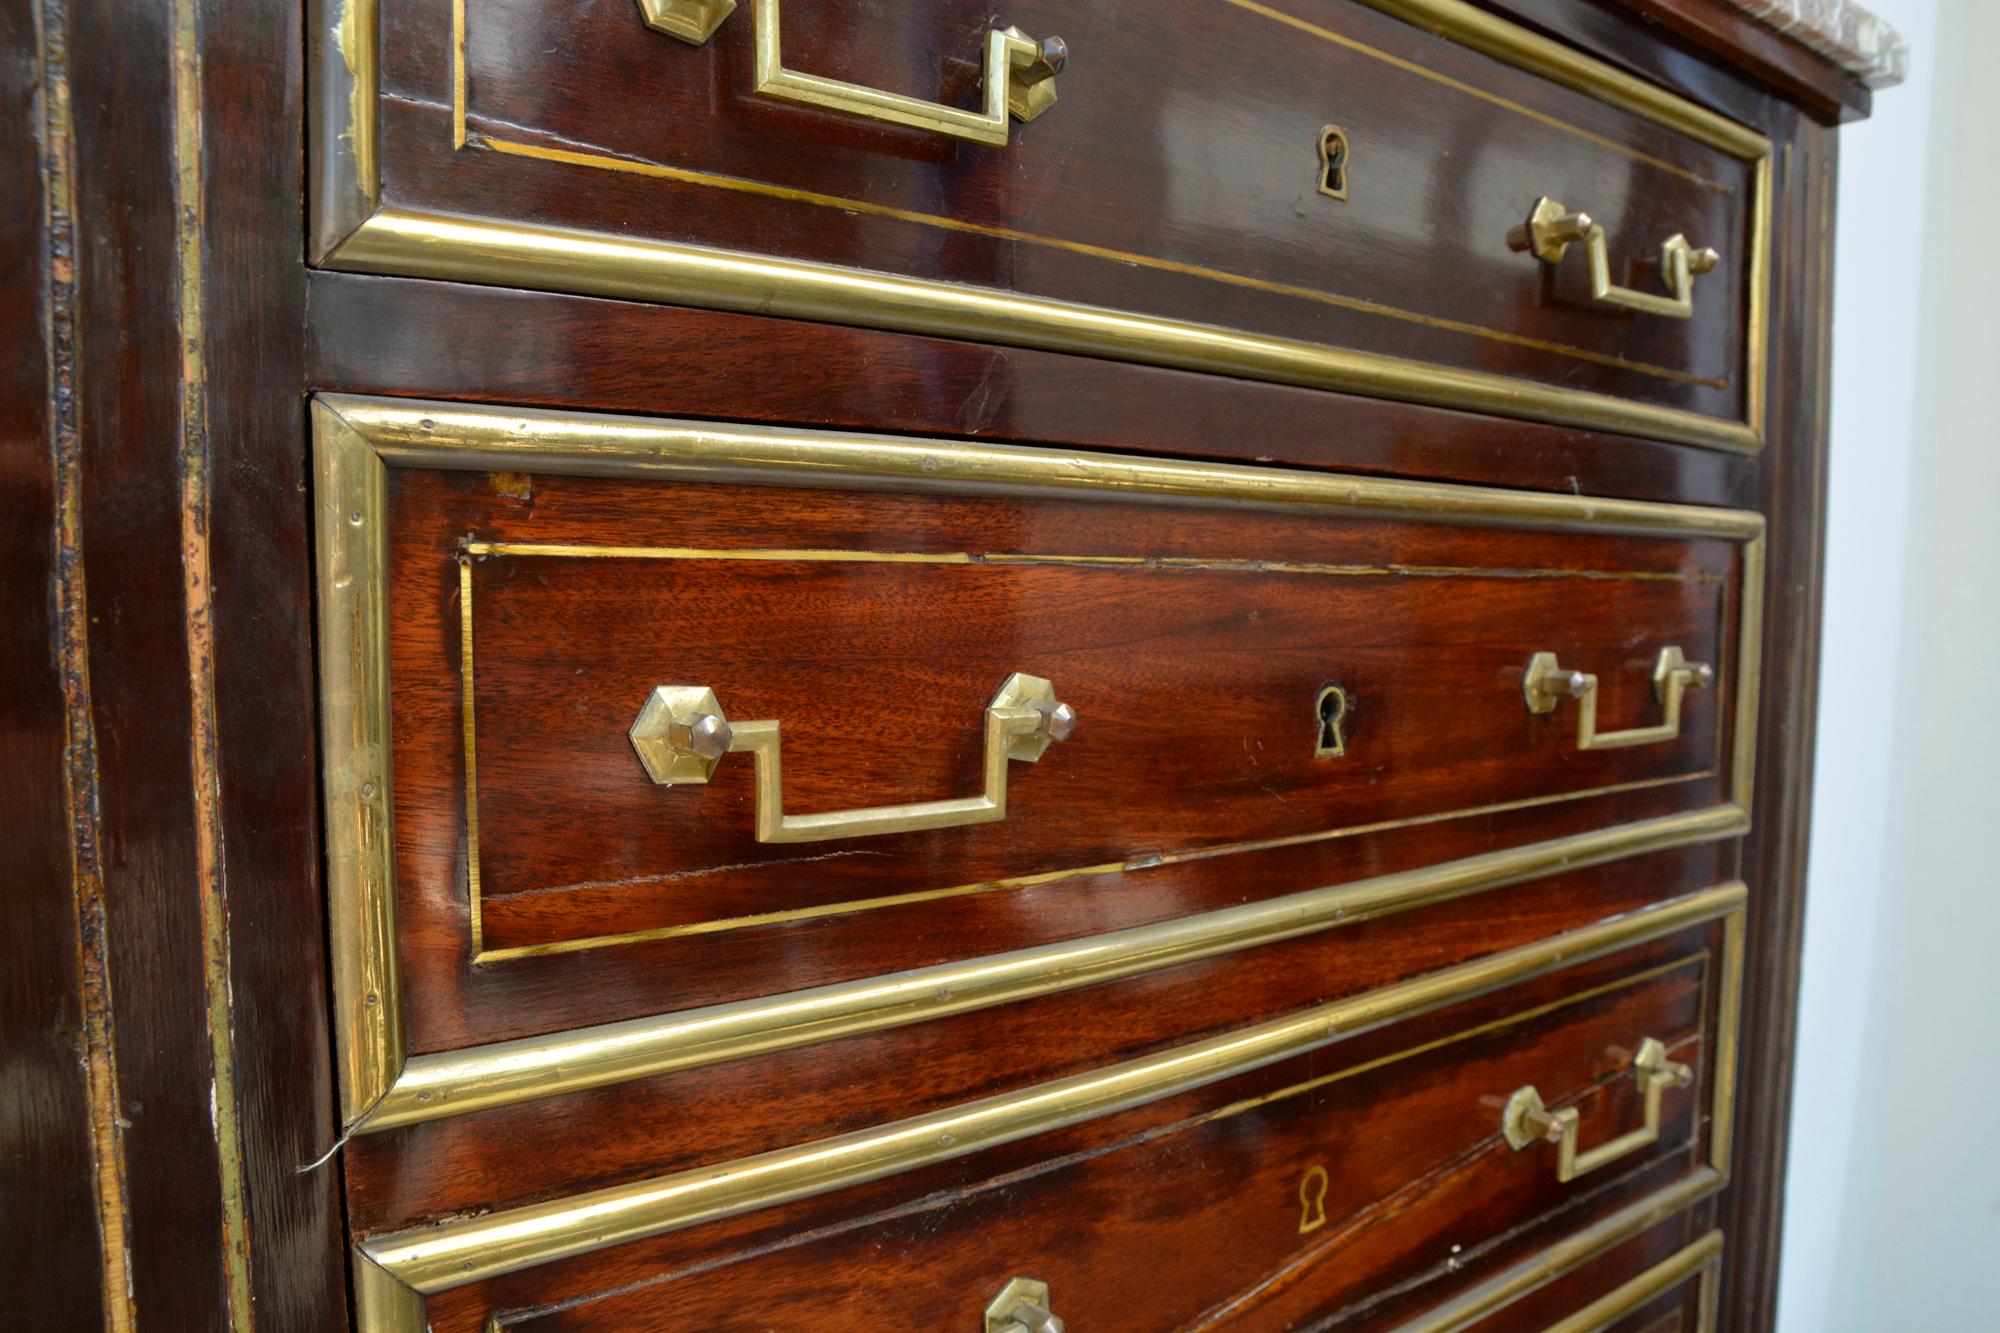 Empire dresser or secretary, Paris, 1810s. Made of mahogany.

Feet with fine brass applications. Eight drawers with fine, circumferential brass strips, two handles each, key inlays also in brass, original marble top. Lateral pilaster strips each